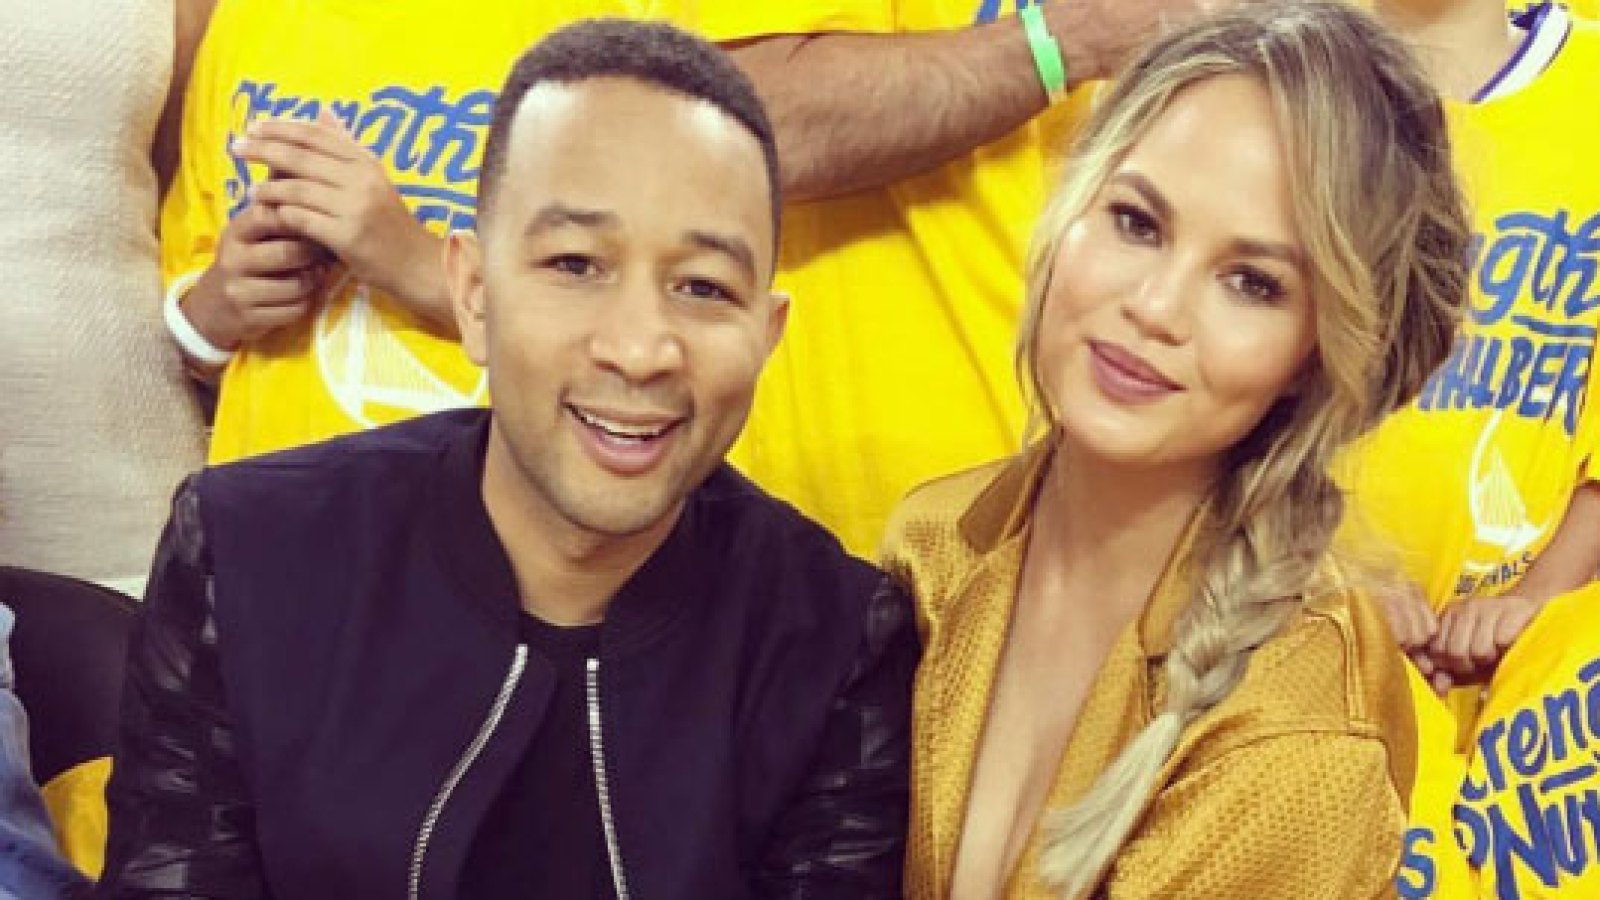 Chrissy Teigen and John Legend introduced baby Luna to the world of NBA